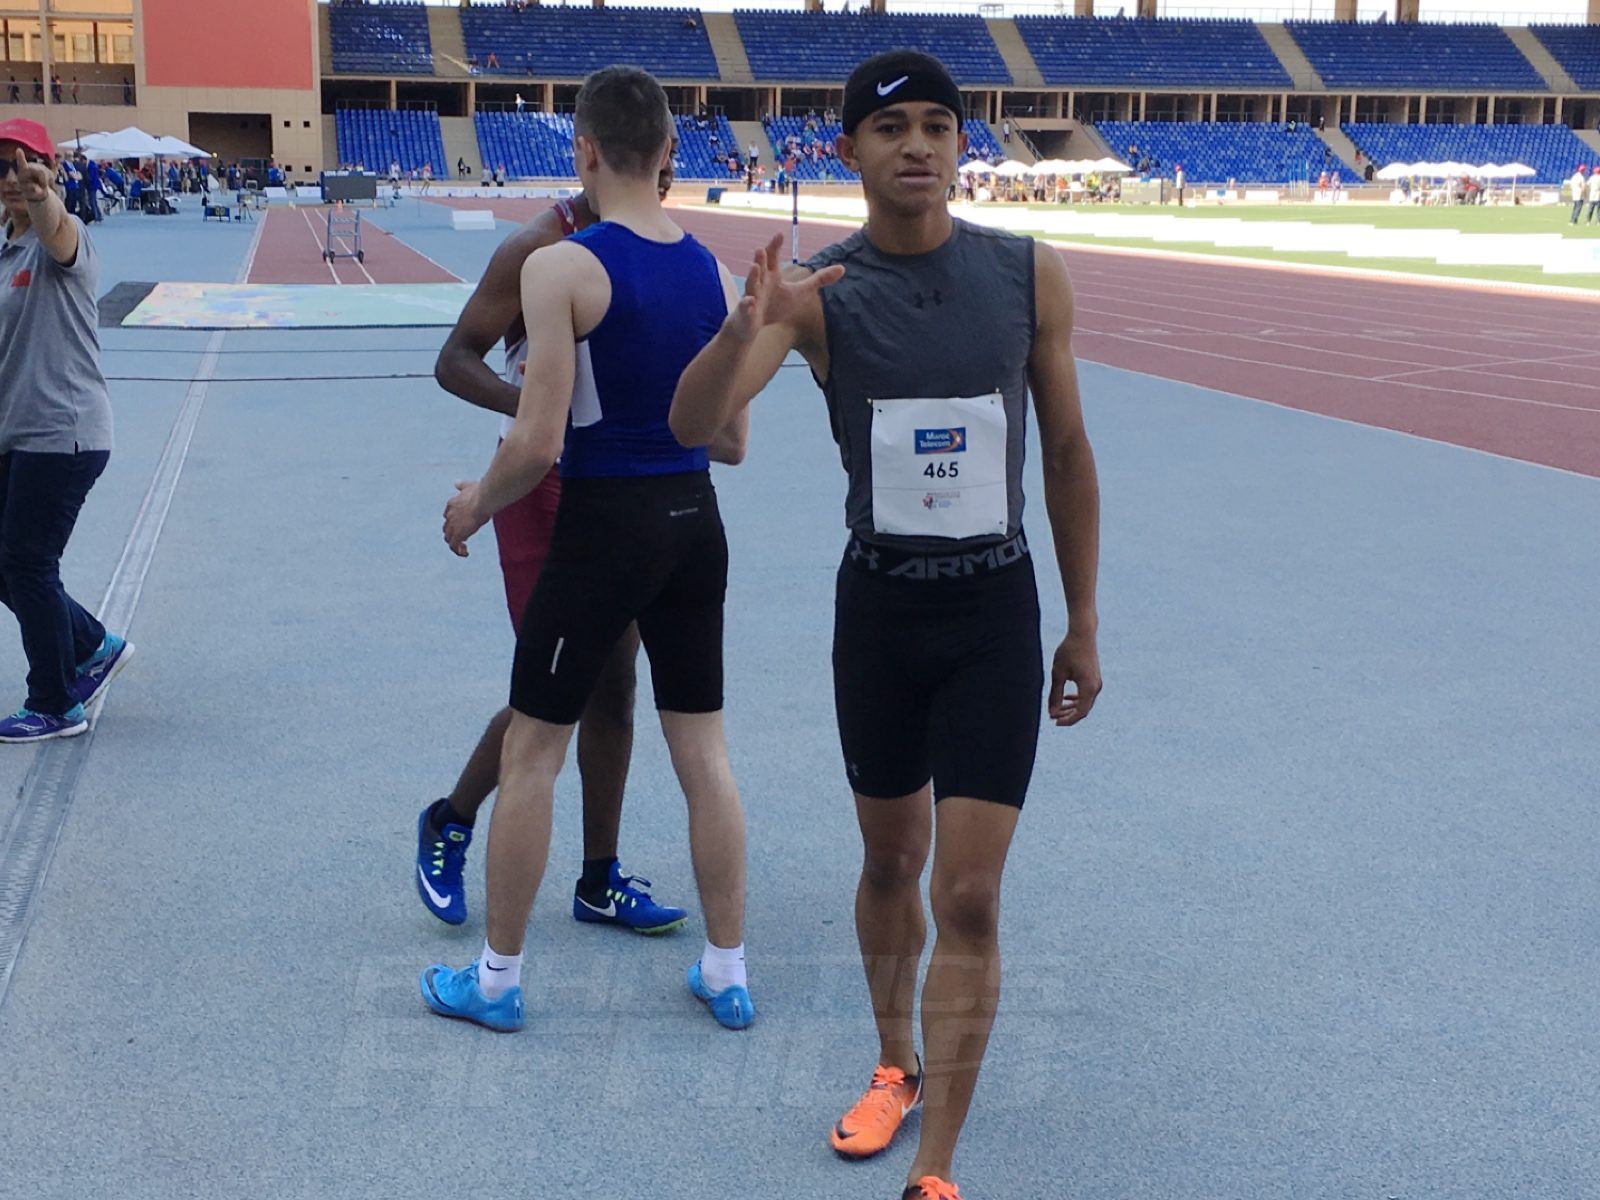 Athlete pose for photo after running in the Boys 100m preliminaries at the Gymnasiade 2018 in Marrakech / Photo Credit: Yomi Omogbeja